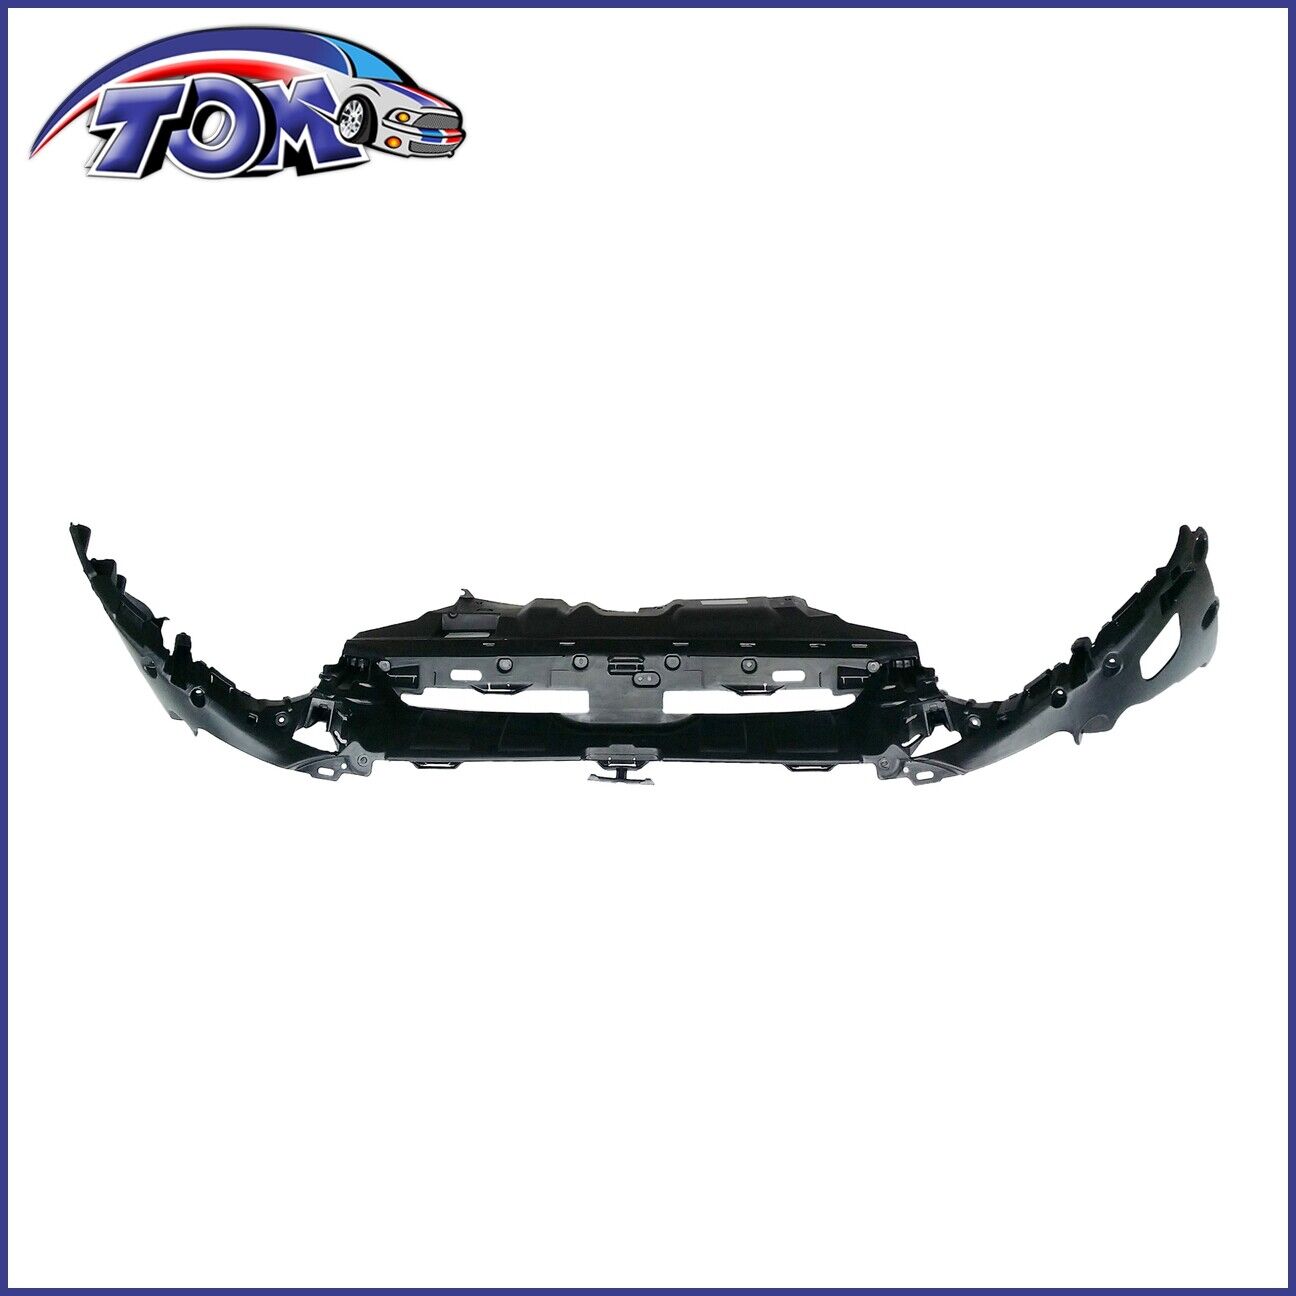 NEW FRONT BUMPER BRACKET FITS 2012-2014 FORD FOCUS FO1065105 / CP9Z17C897A